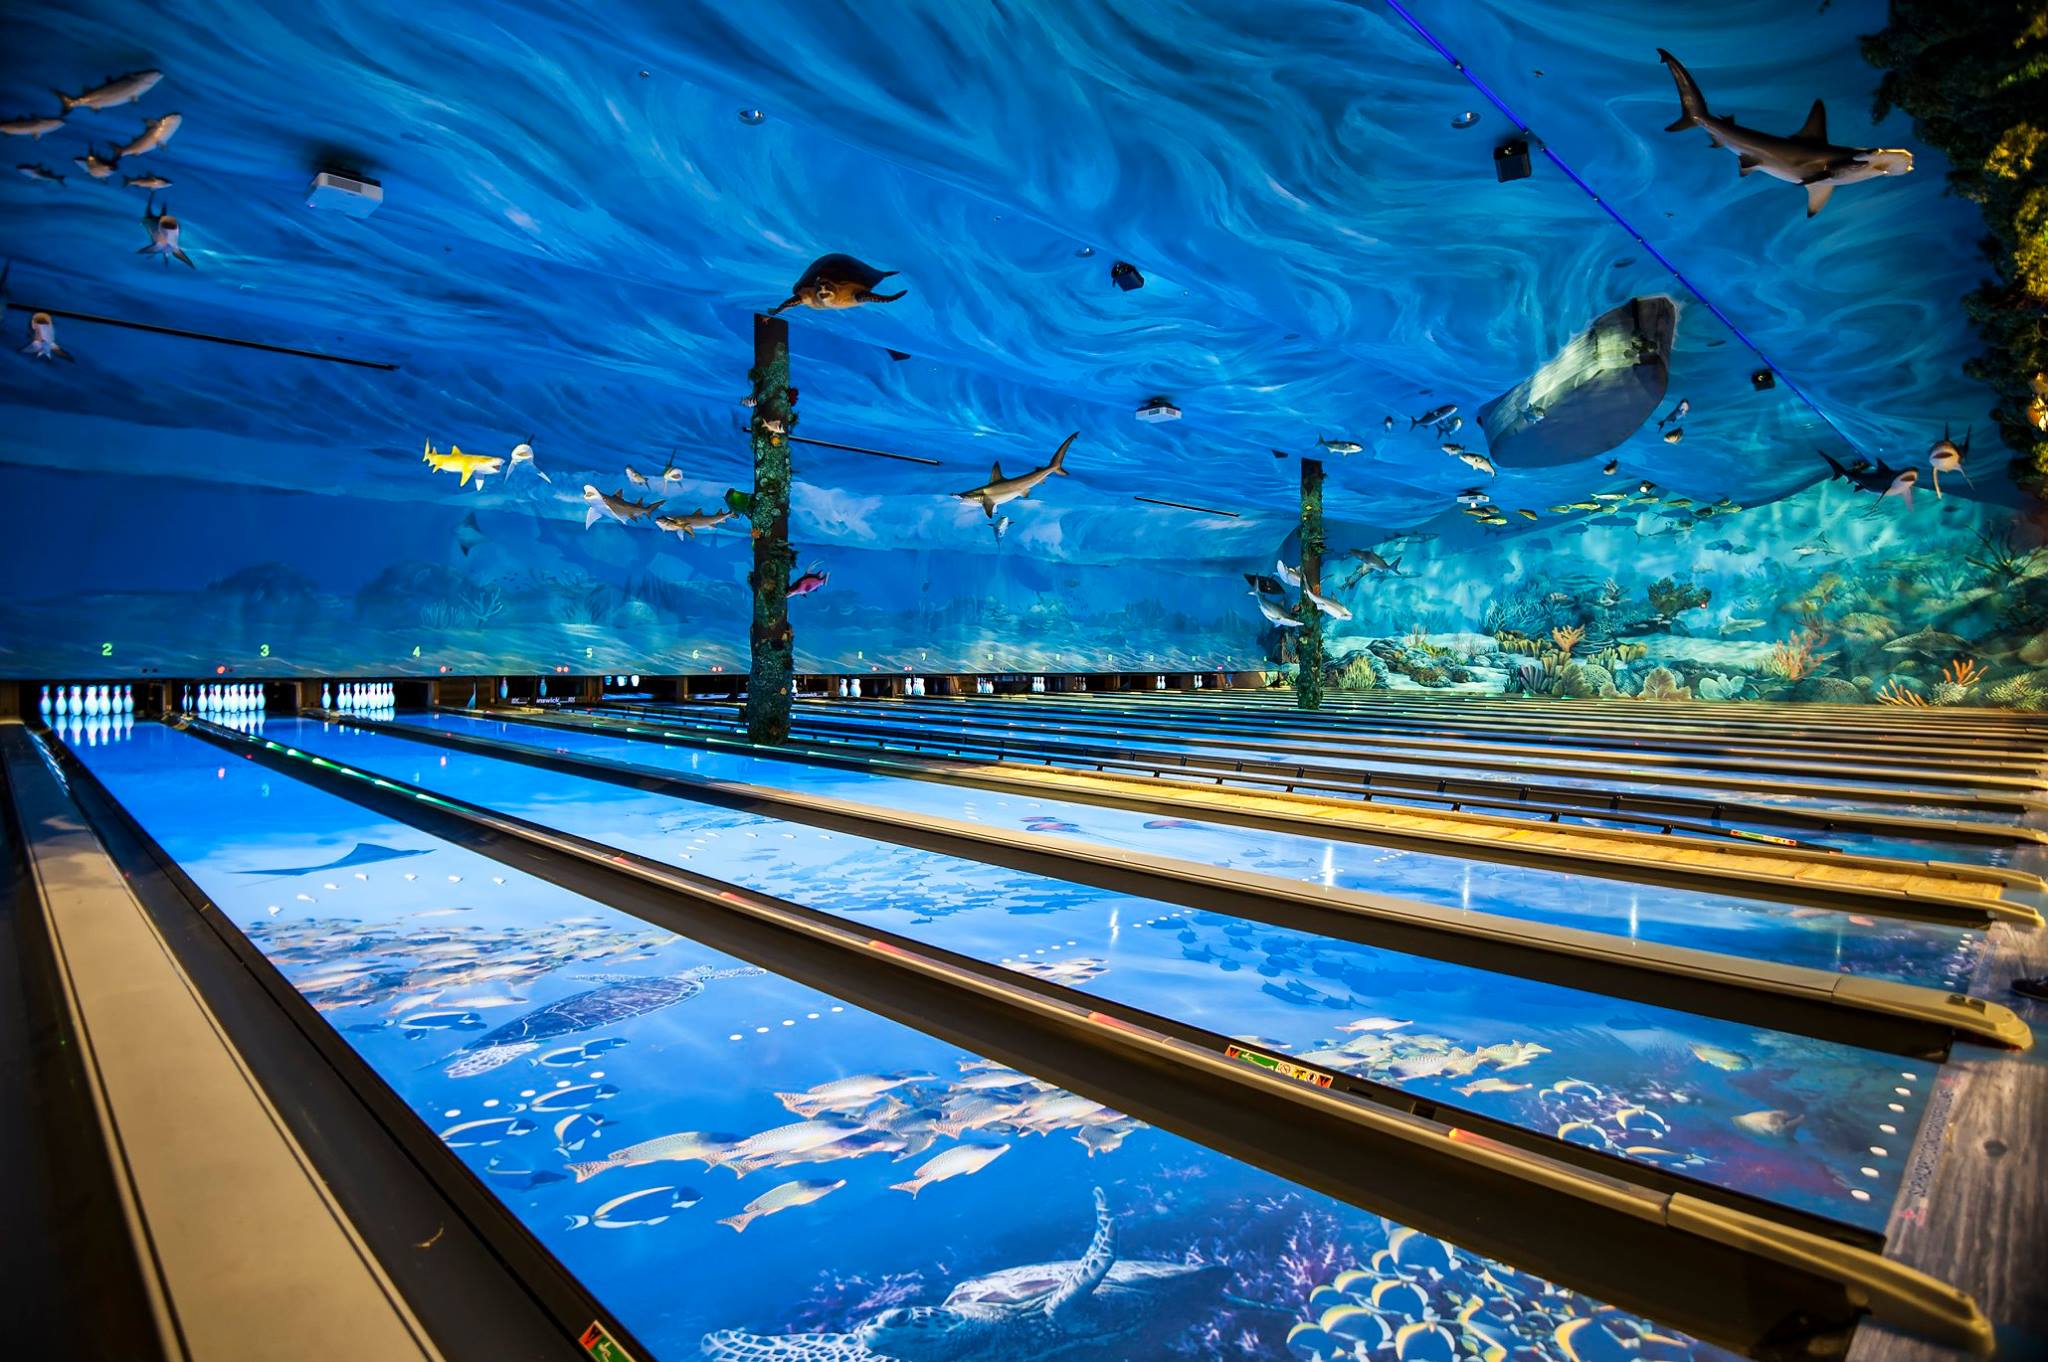 This One-Of-A-Kind Ocean Themed Restaurant And Bowling Alley In Iowa Is